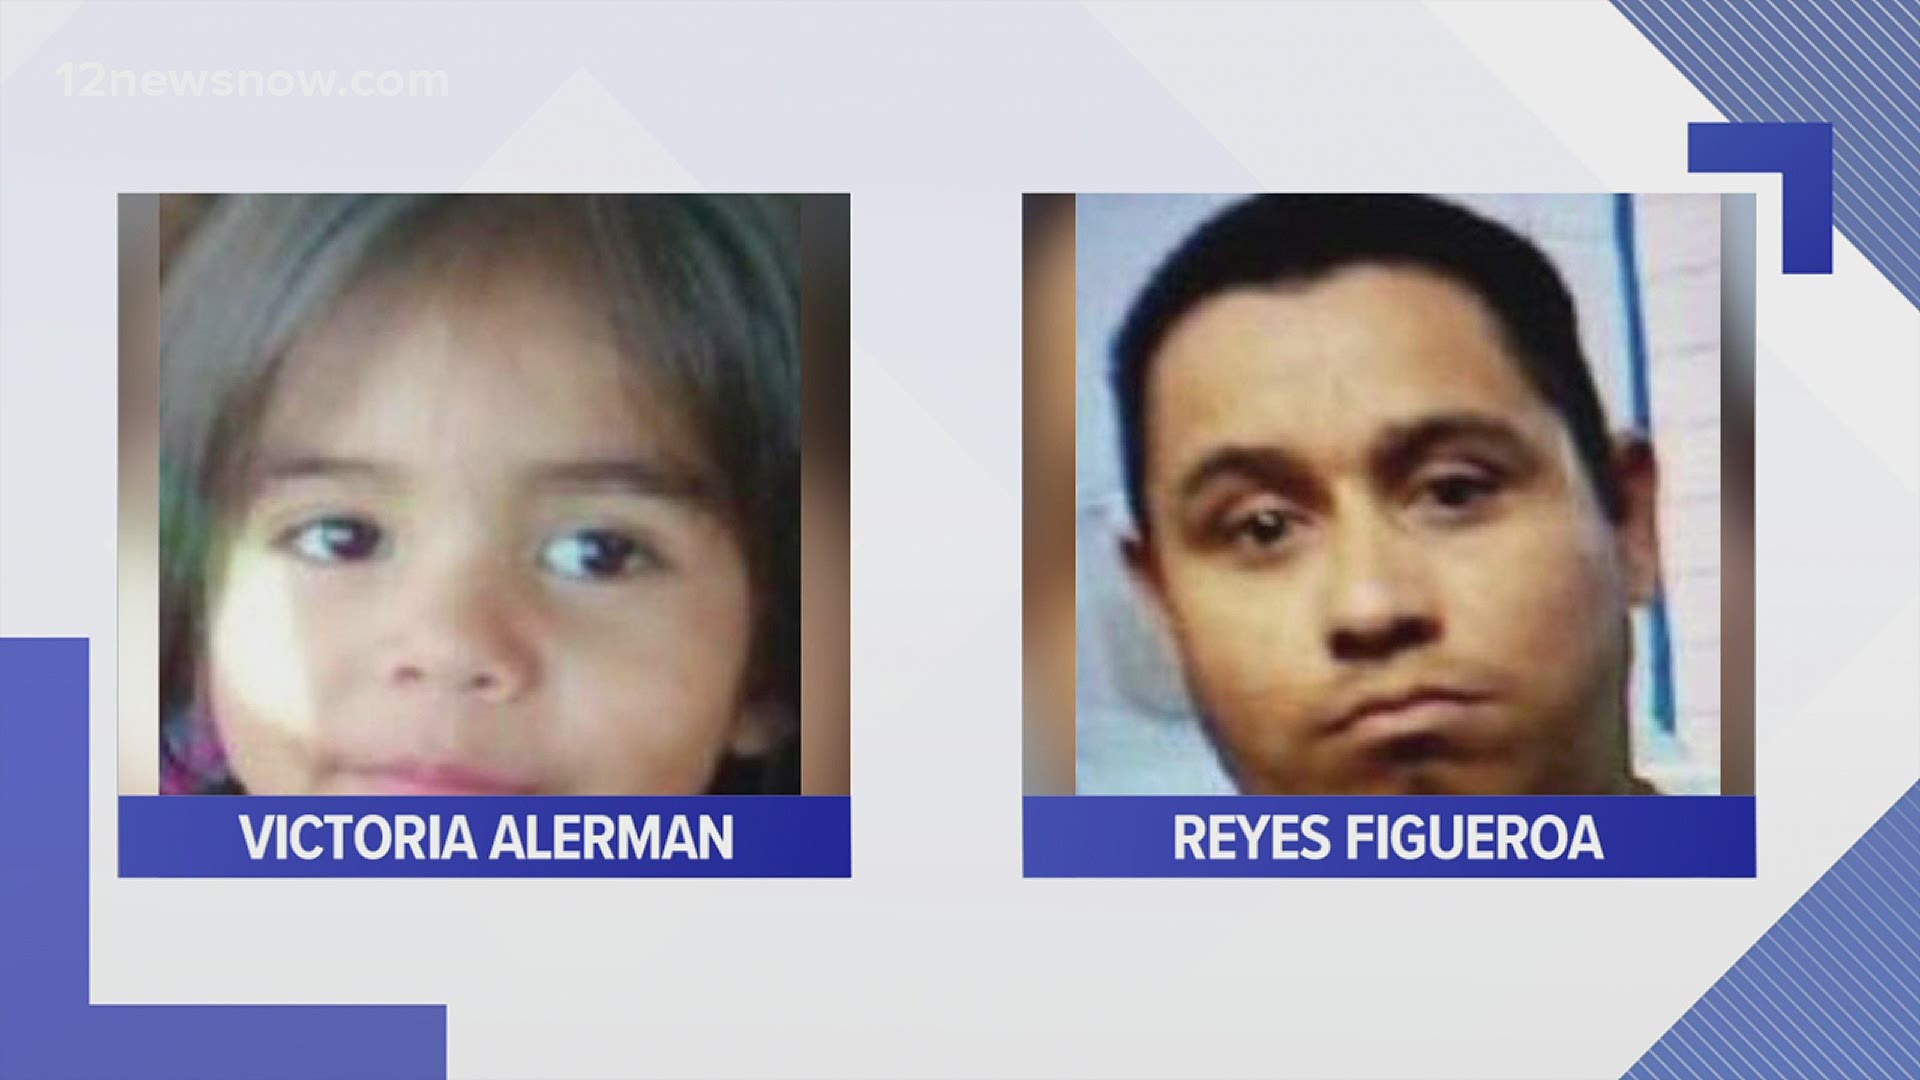 Two-year-old Victoria Alerman went home safely after she was last seen around 5:15 p.m. Friday. Police said she was abducted from northwest Texas.